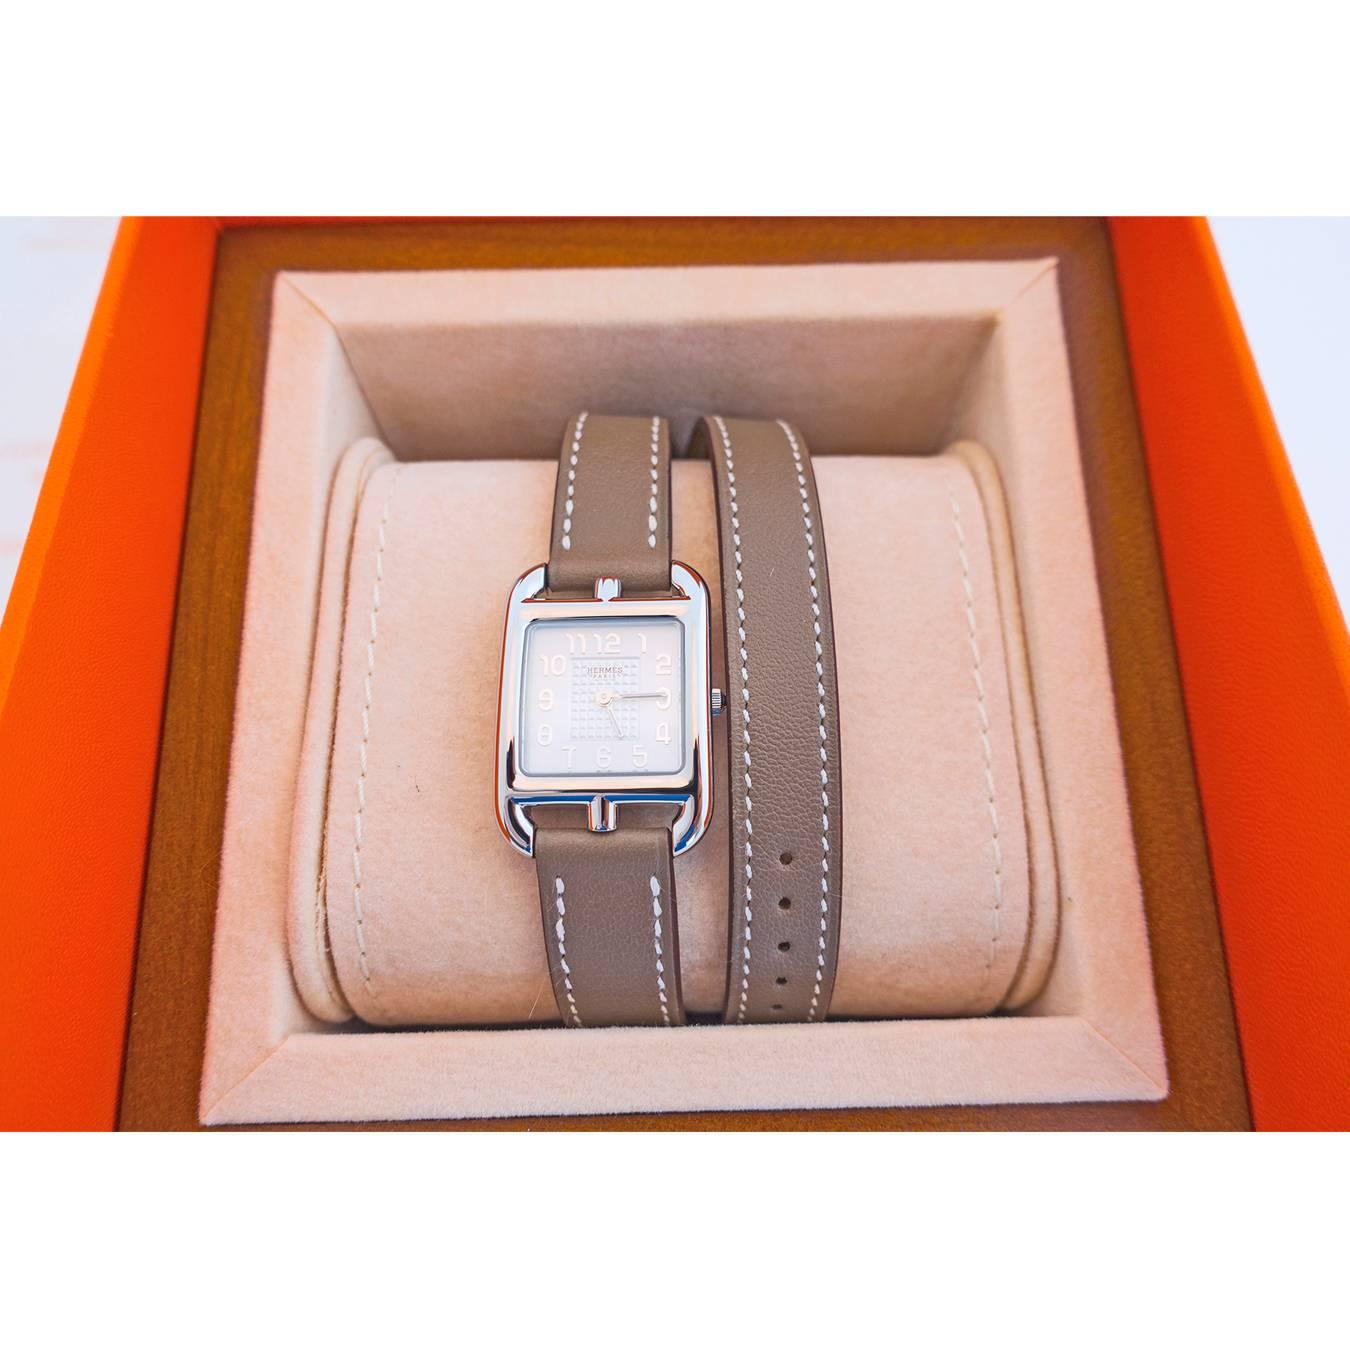 Store fresh.  Pristine condition.  Purchased November 2015 from Hermes store.
Below retail $3,239 including tax where we are
Perfect gift!  Comes full set with Hermes warranty book, instruction manual, watch box and ribbon.
Hermes steel watch, 23